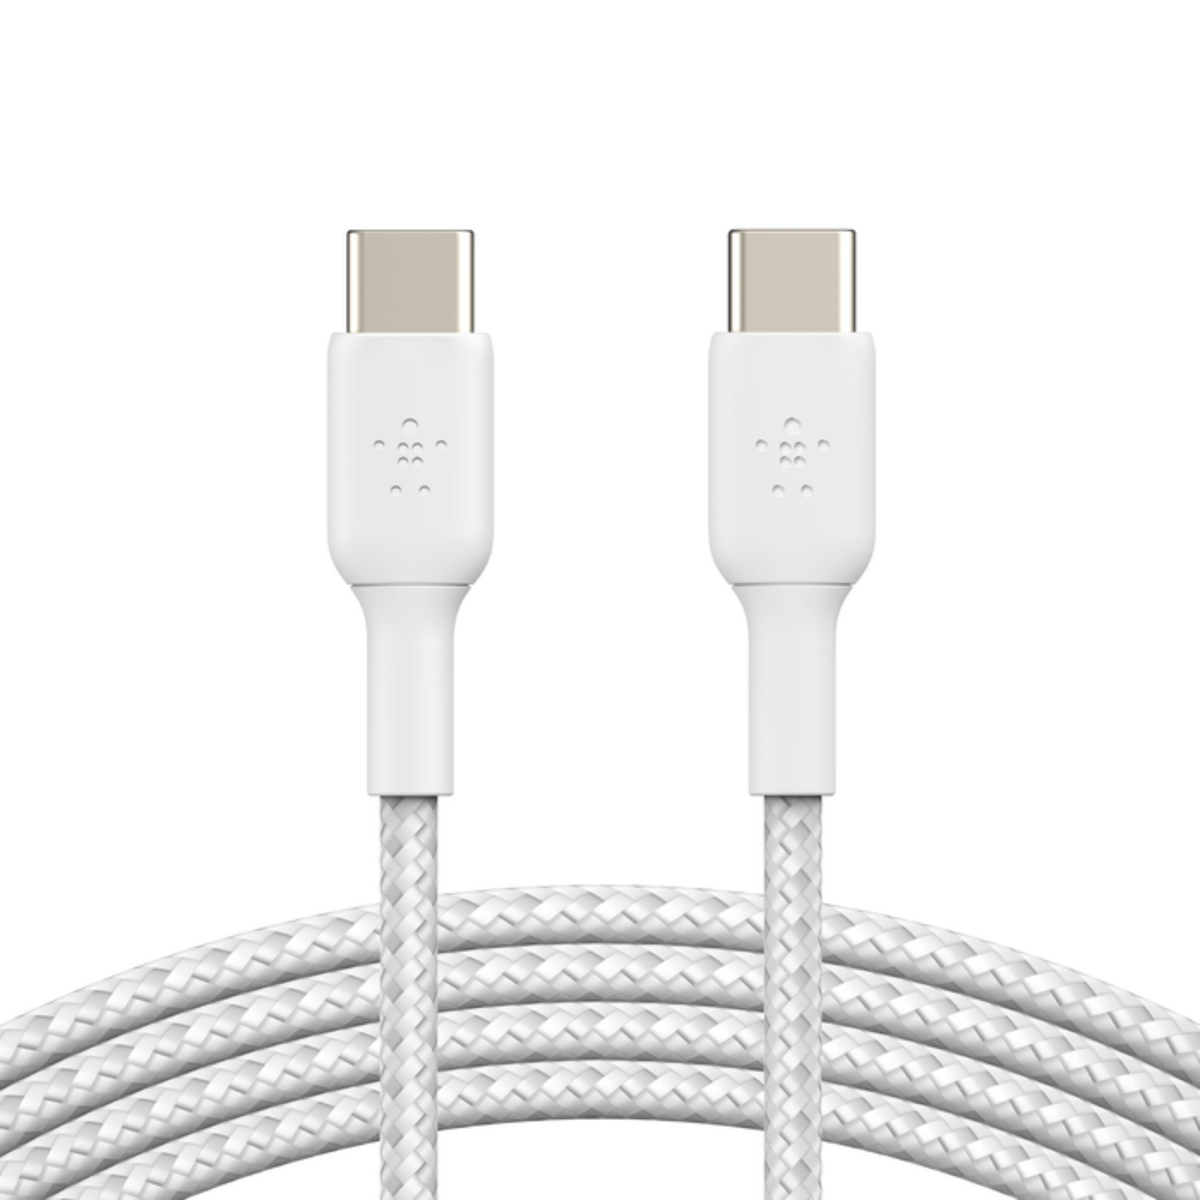 Belkin BoostCharge Braided USB-C to USB-C Cable, 1 m, White, CAB004BT